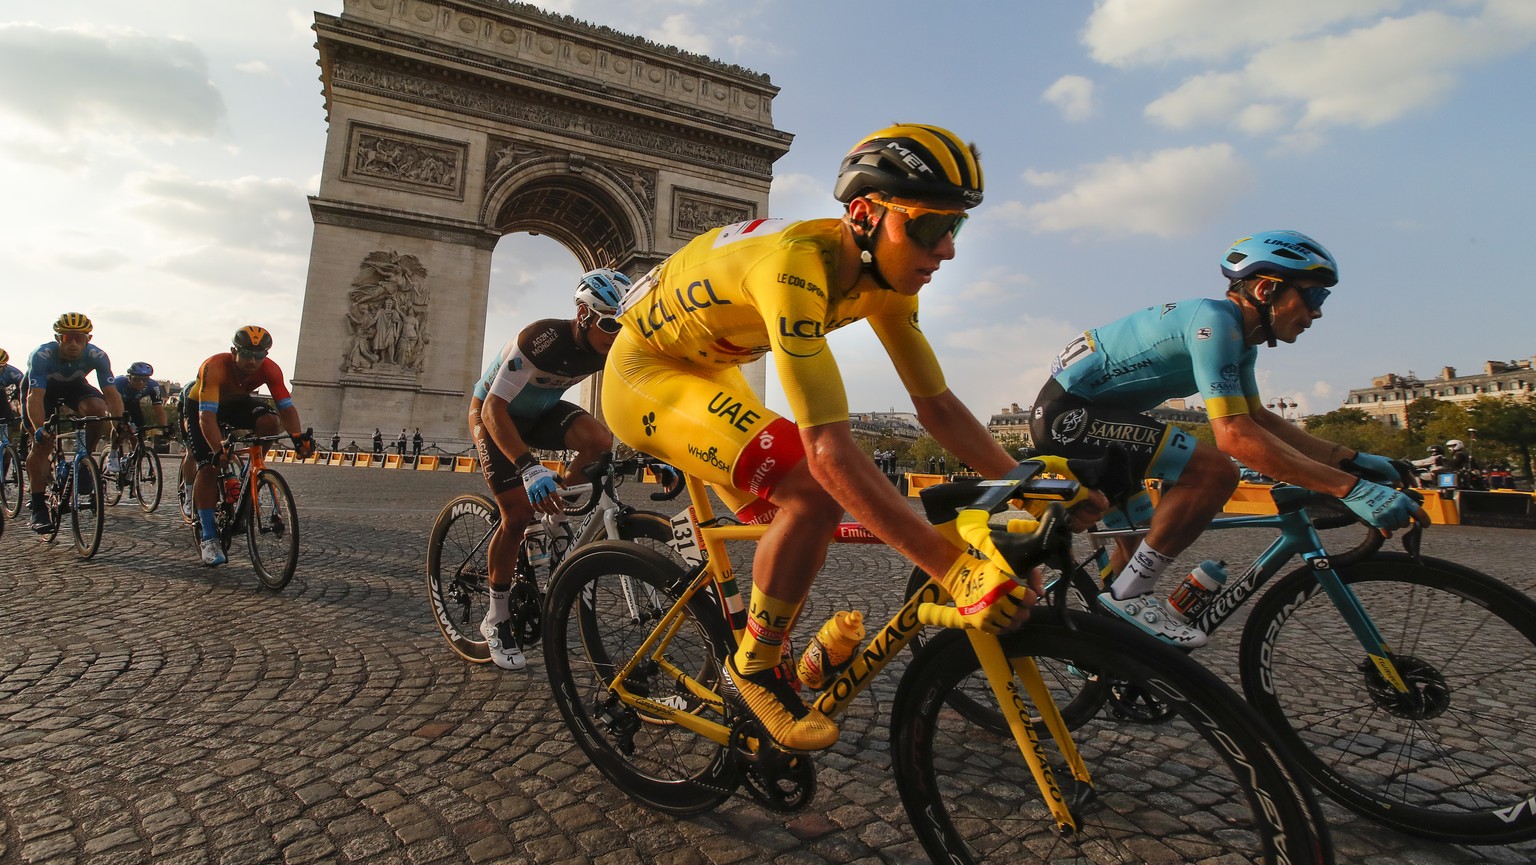 Slovenia&#039;s Tadej Pogacar, wearing the overall leader&#039;s yellow jersey, rides past the Arc de Triomphe on the Champs-Elysees during the twenty-first and last stage of the Tour de France cyclin ...